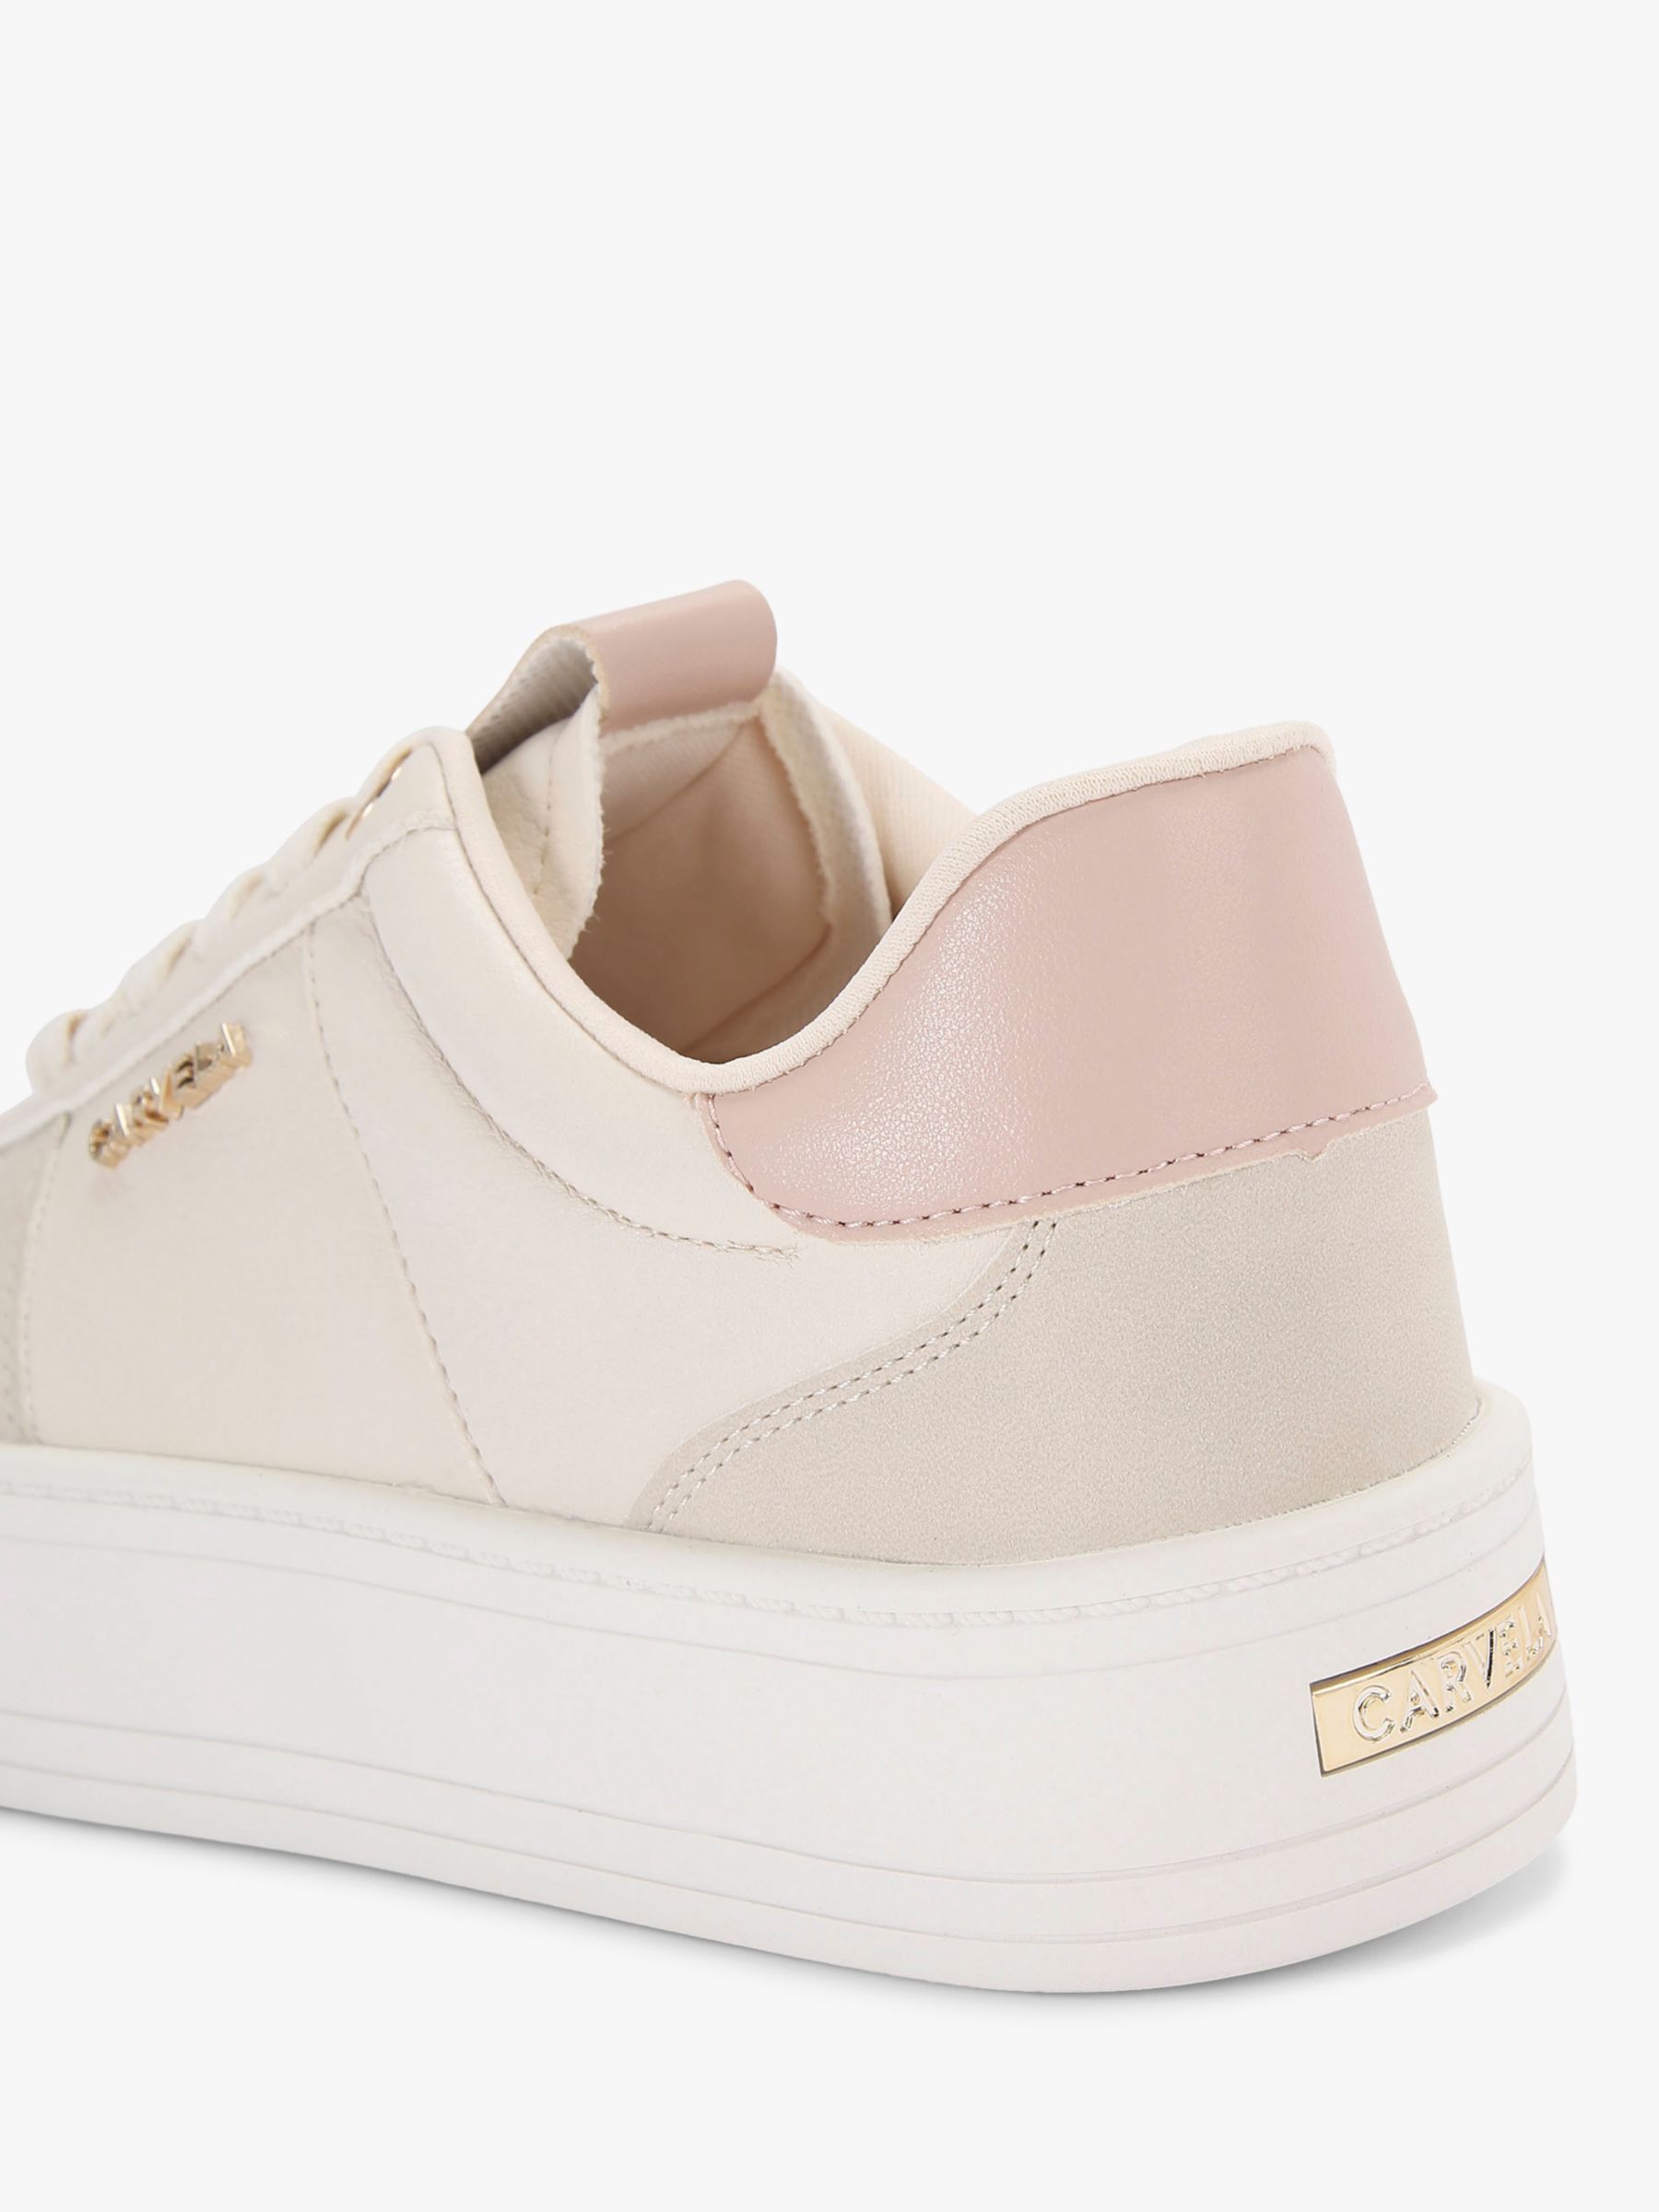 Carvela Relay Lace Up Trainers, Pink/Multi at John Lewis & Partners